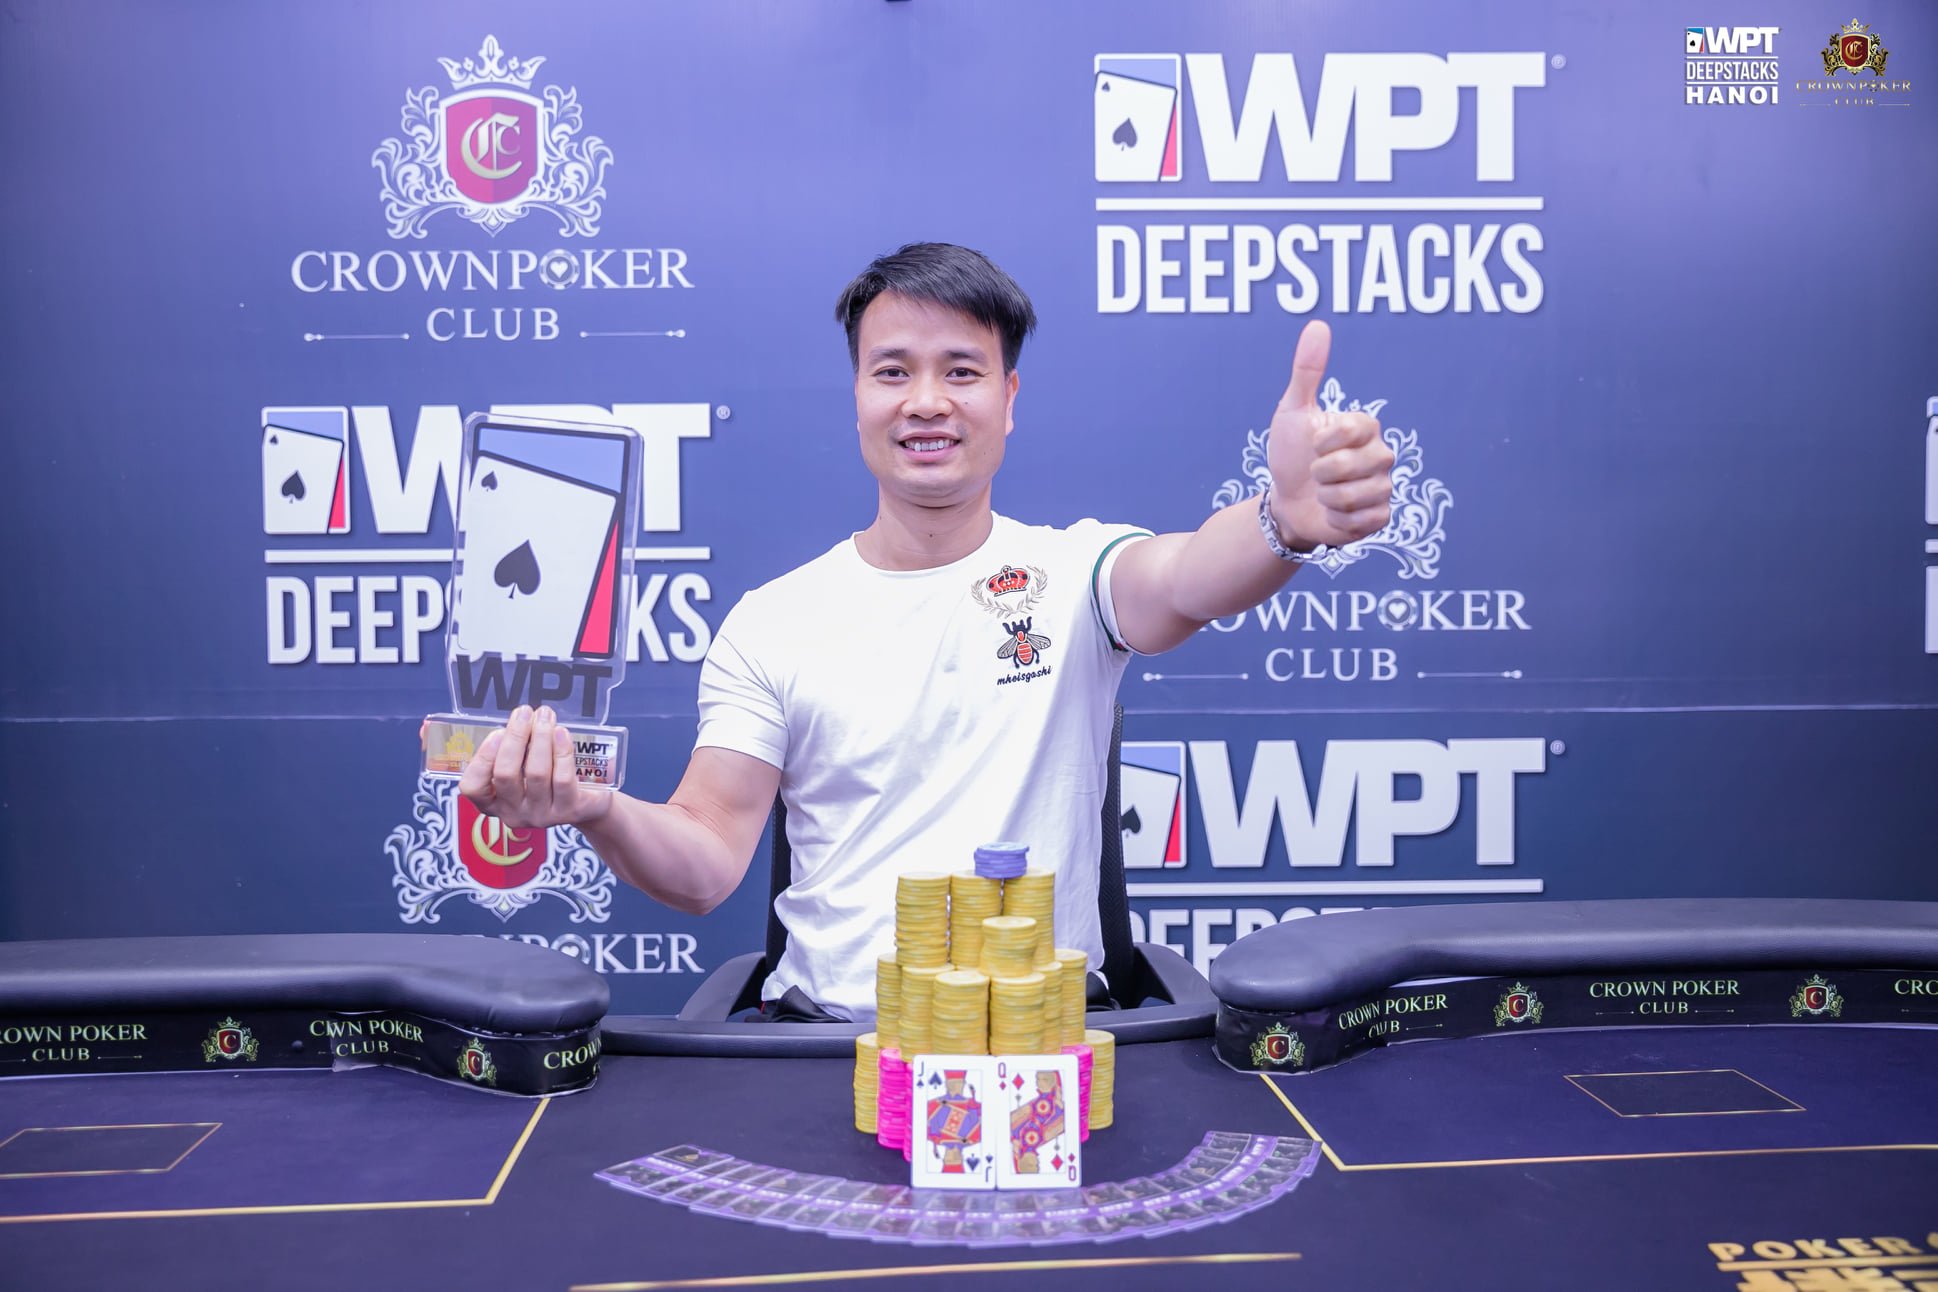 WPTDeepstacks Hanoi: Nguyễn Quang Huy and Nguyễn Chiến Hữu win events; Main Event starts today